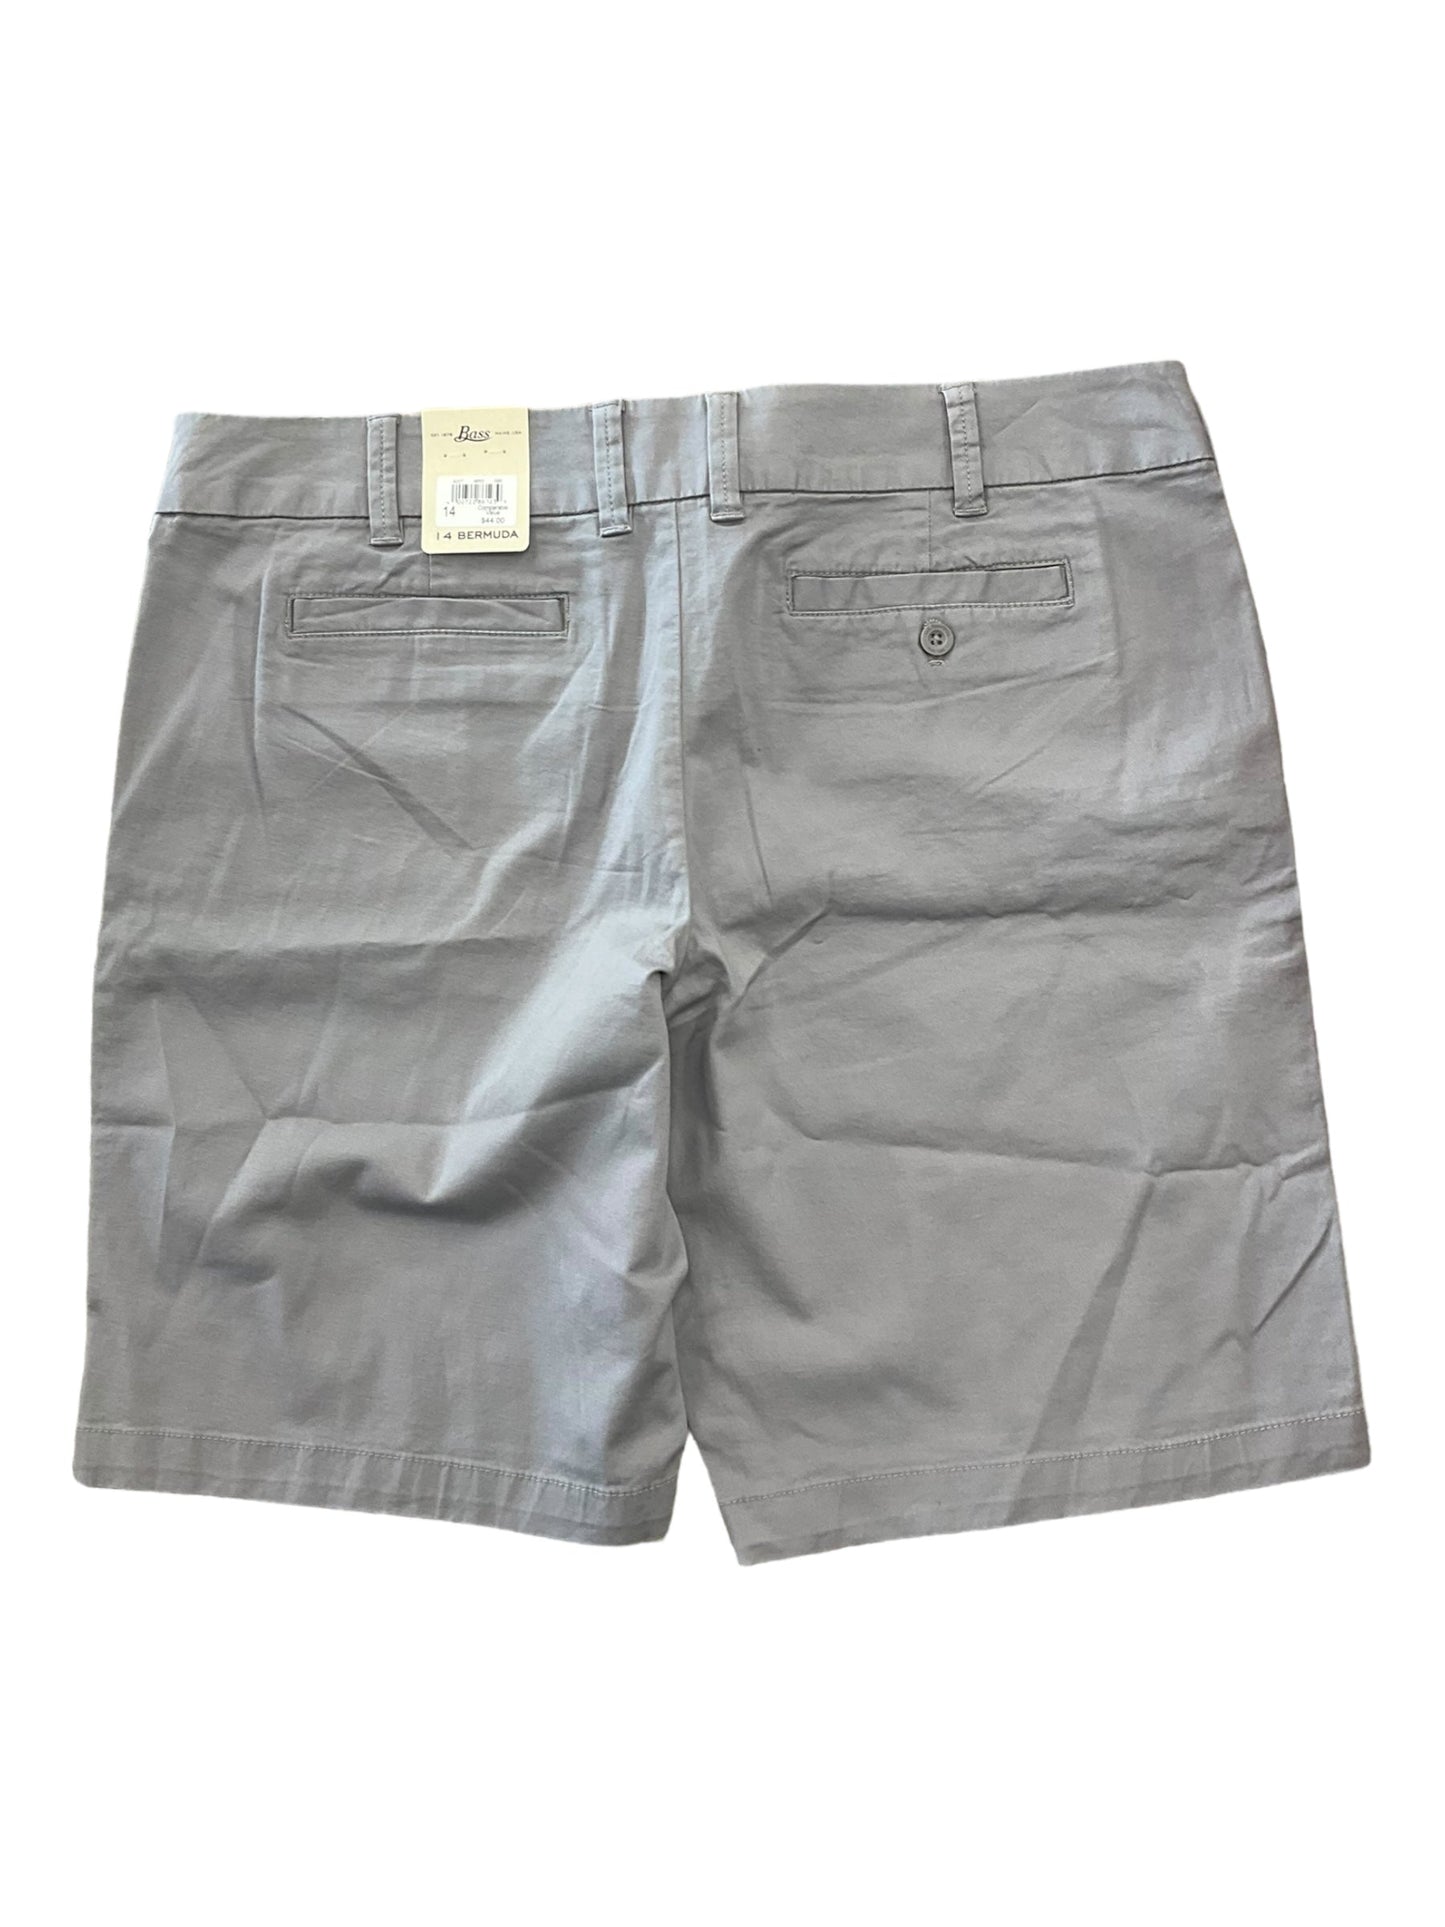 Shorts By Bass  Size: 14